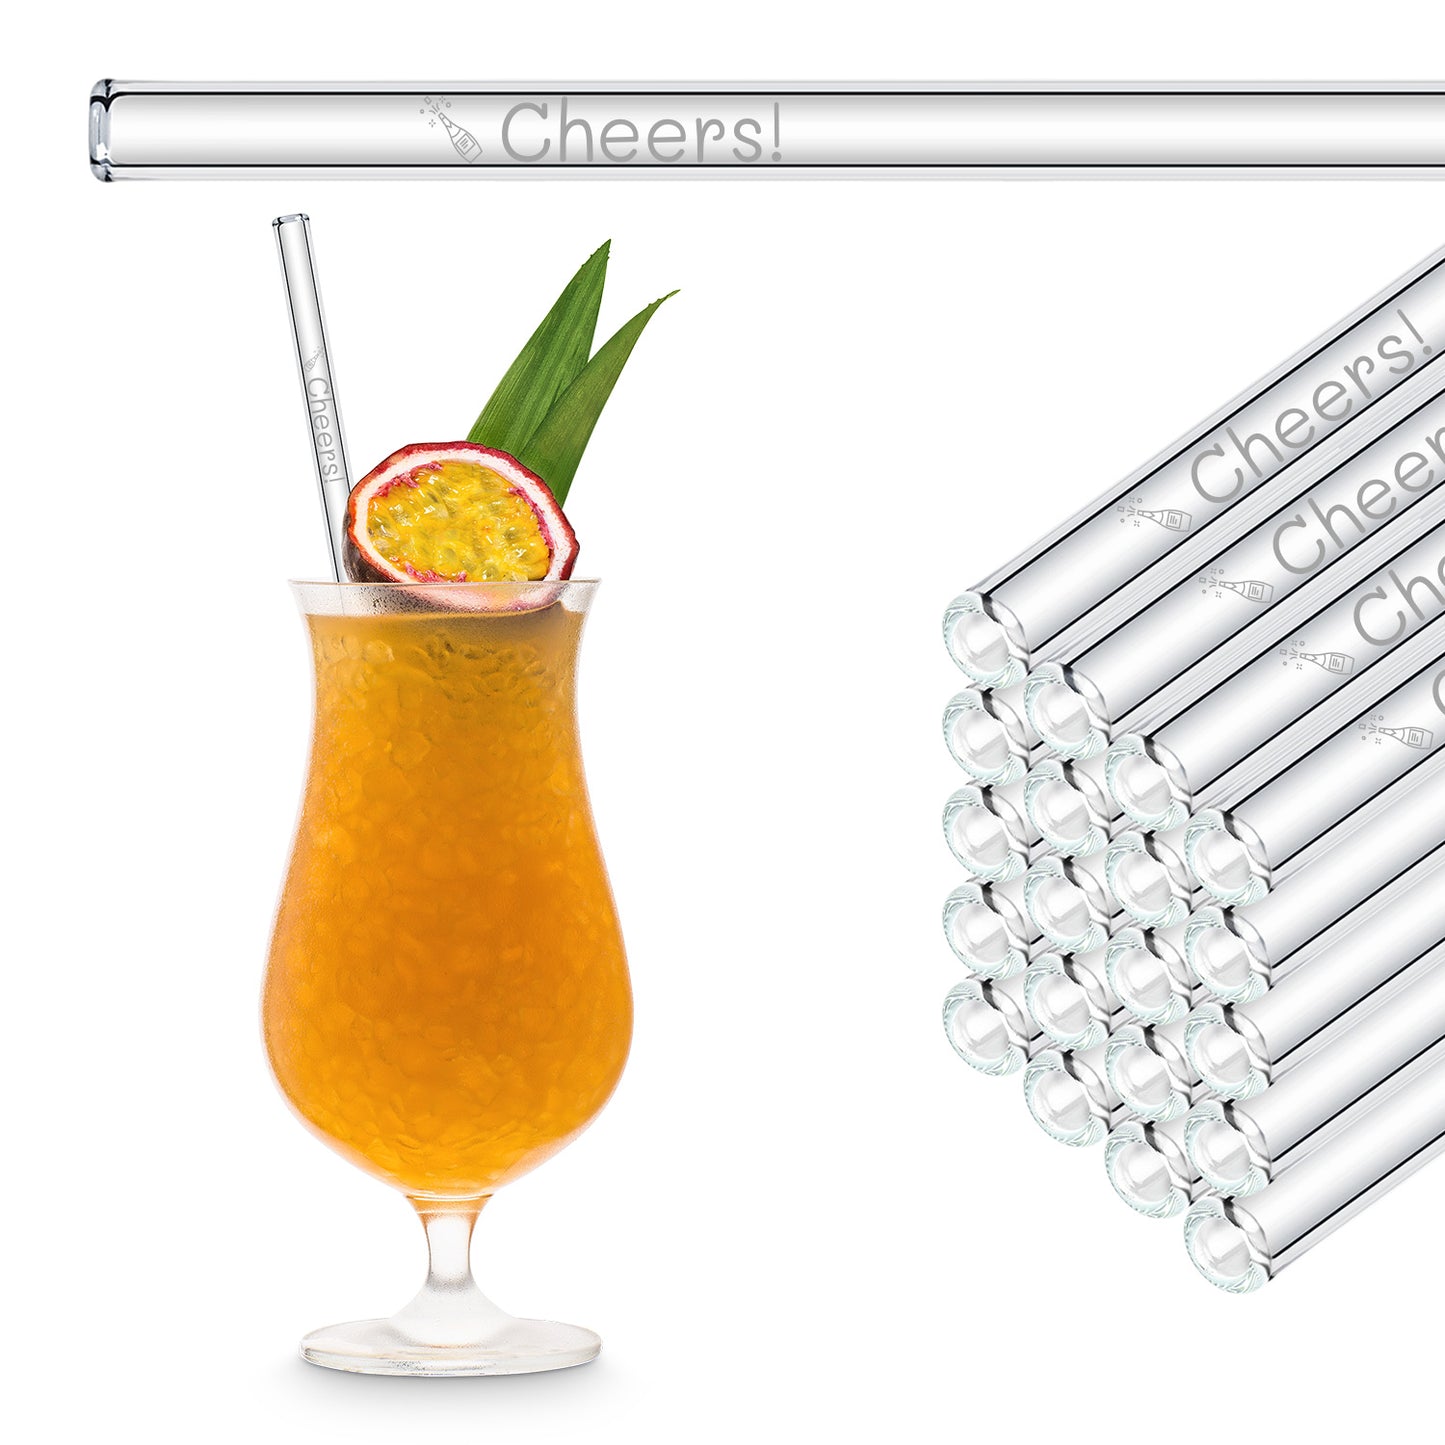 Cheers! 50x engraved glass straws - gift for wedding guests